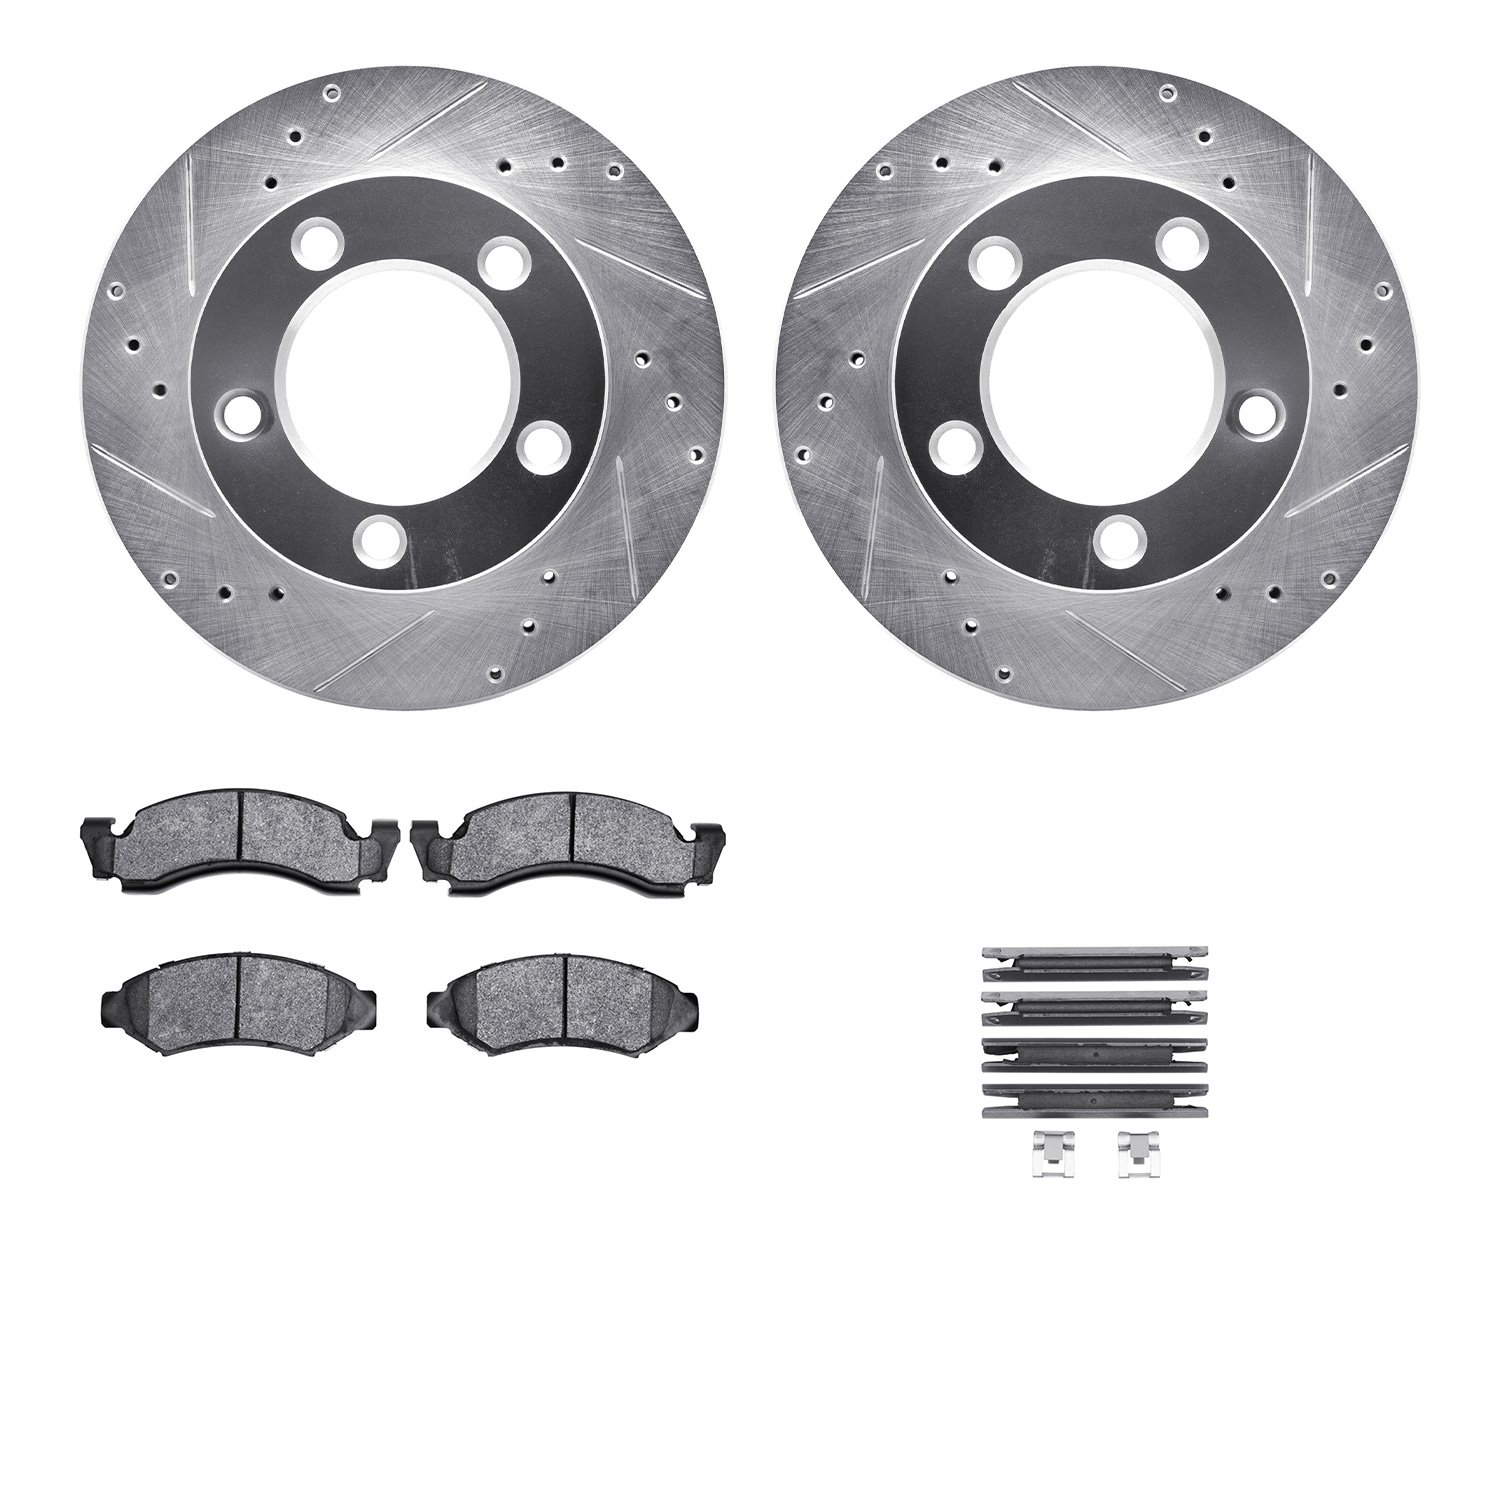 7412-54010 Drilled/Slotted Brake Rotors with Ultimate-Duty Brake Pads Kit & Hardware [Silver], 1986-1993 Ford/Lincoln/Mercury/Ma